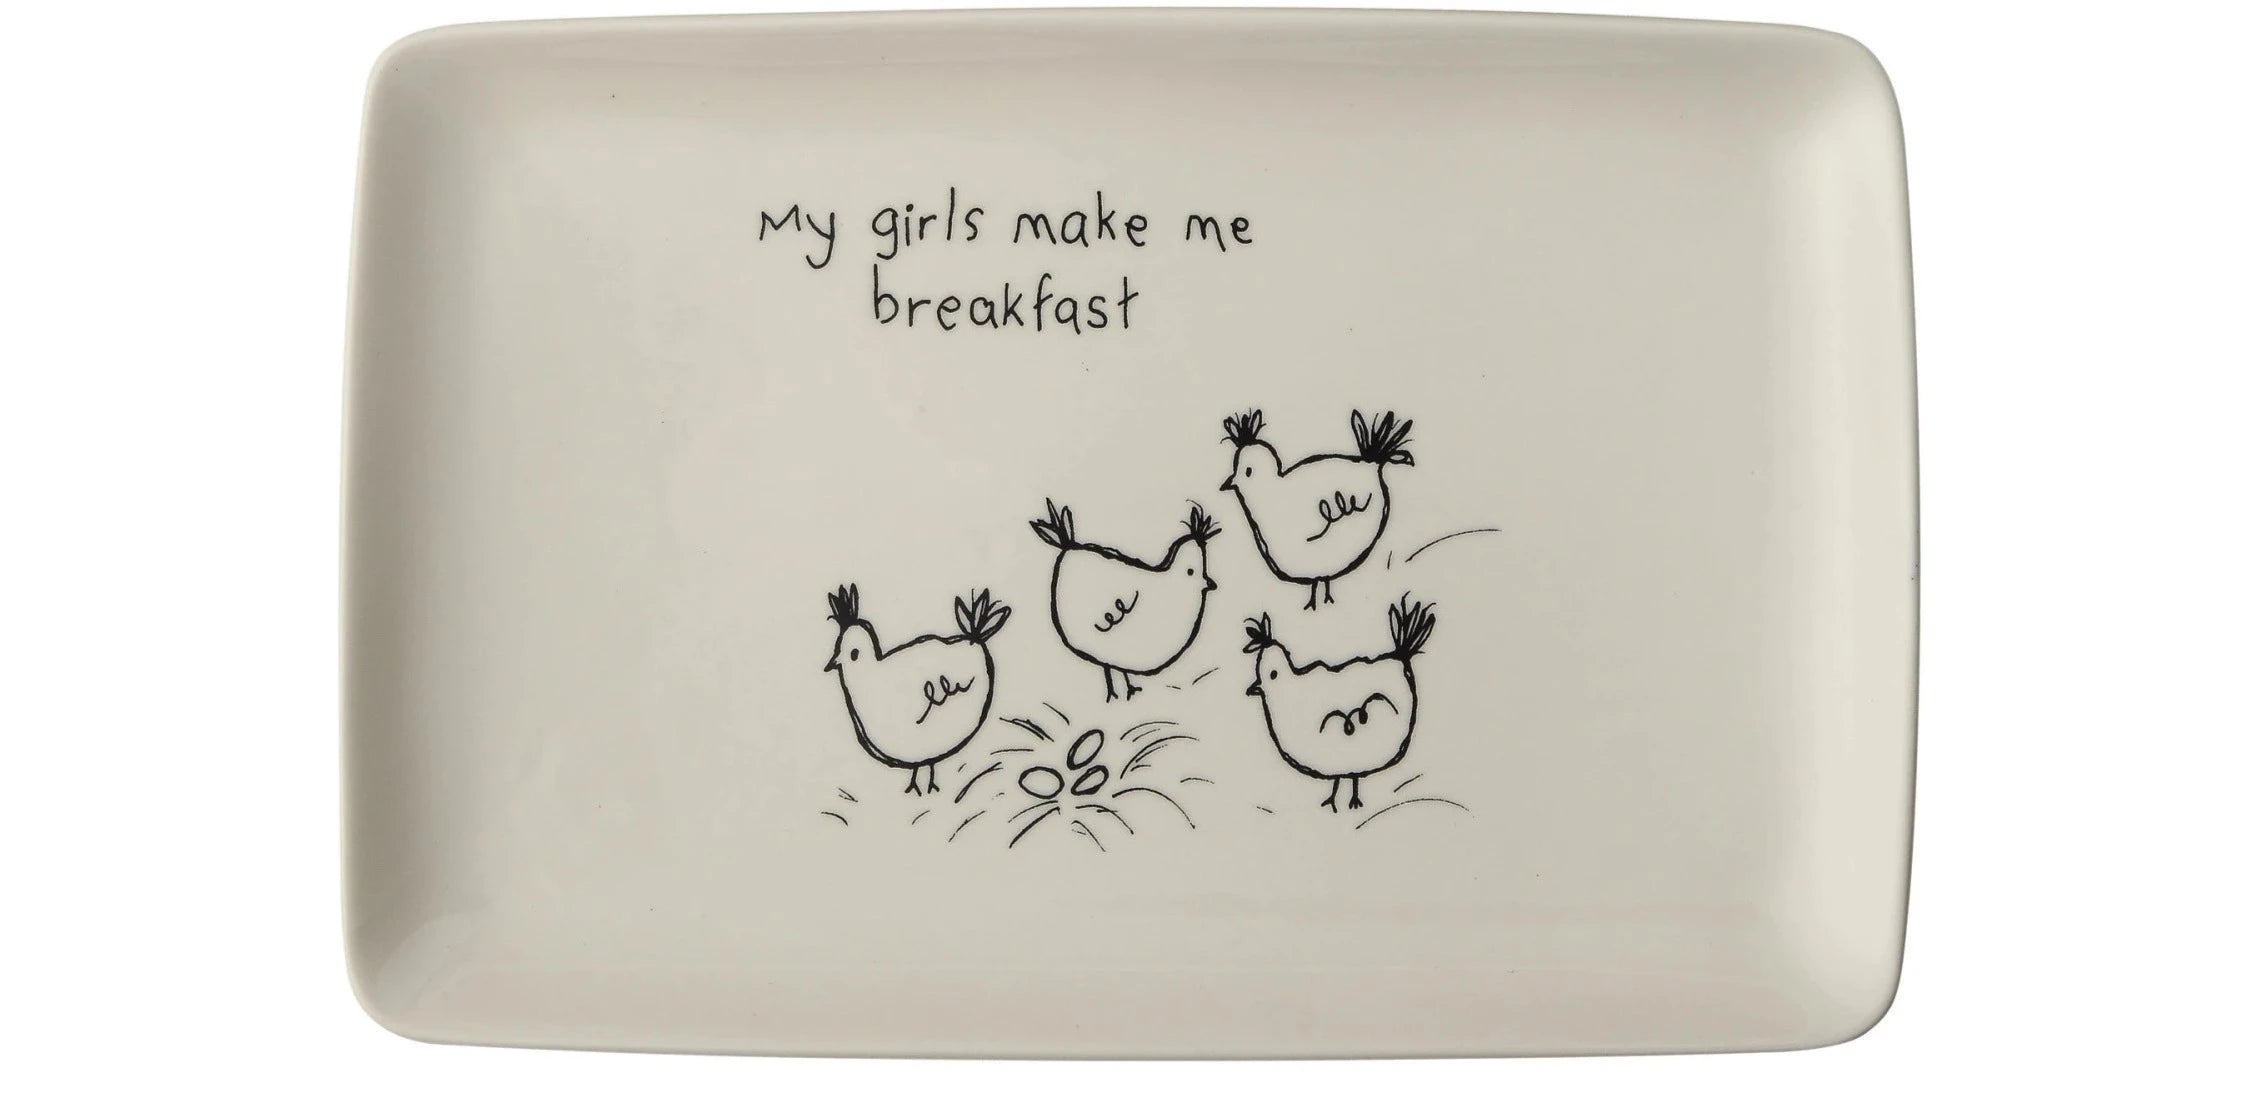 Platter with Chickens and Saying, 2 Styles